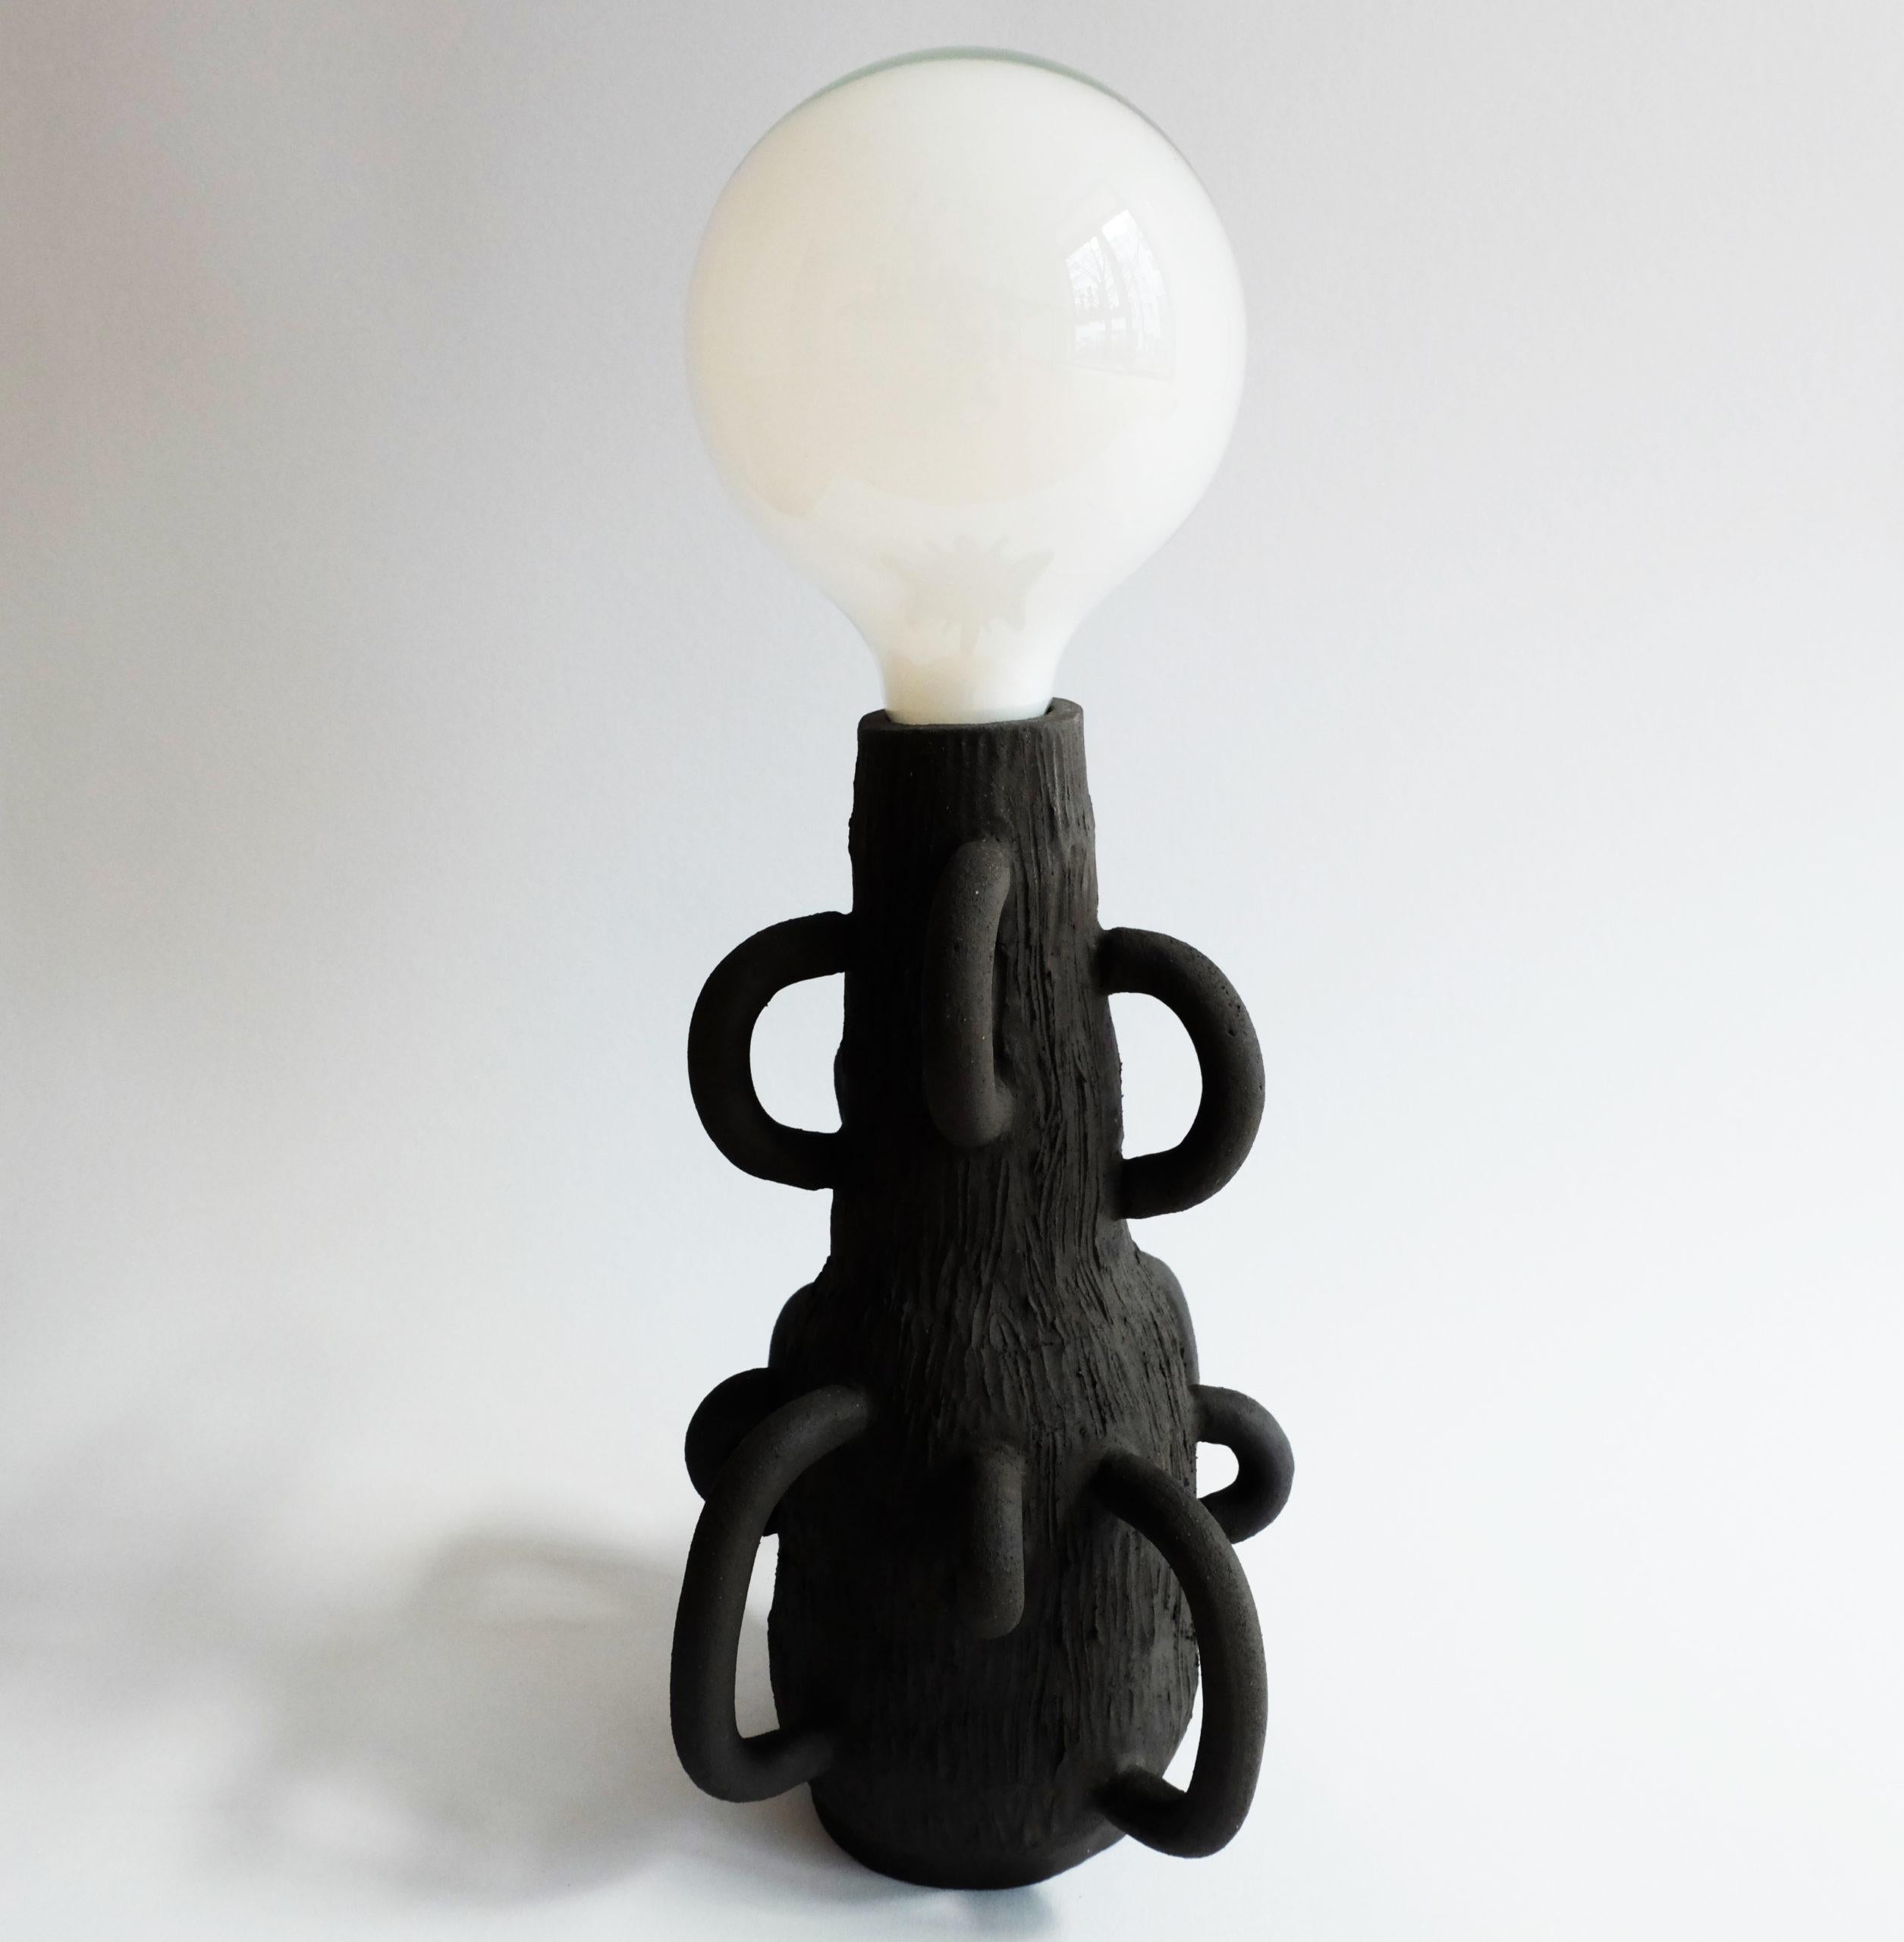 Enssi Table Lamp by Ia Kutateladze
One Of A Kind.
Dimensions: W 19 x H 30 cm.
Materials: Ceramic.

Each piece is one of a kind, due to its free hand-building process. Different color variations available: raw black clay, raw white clay and raw red